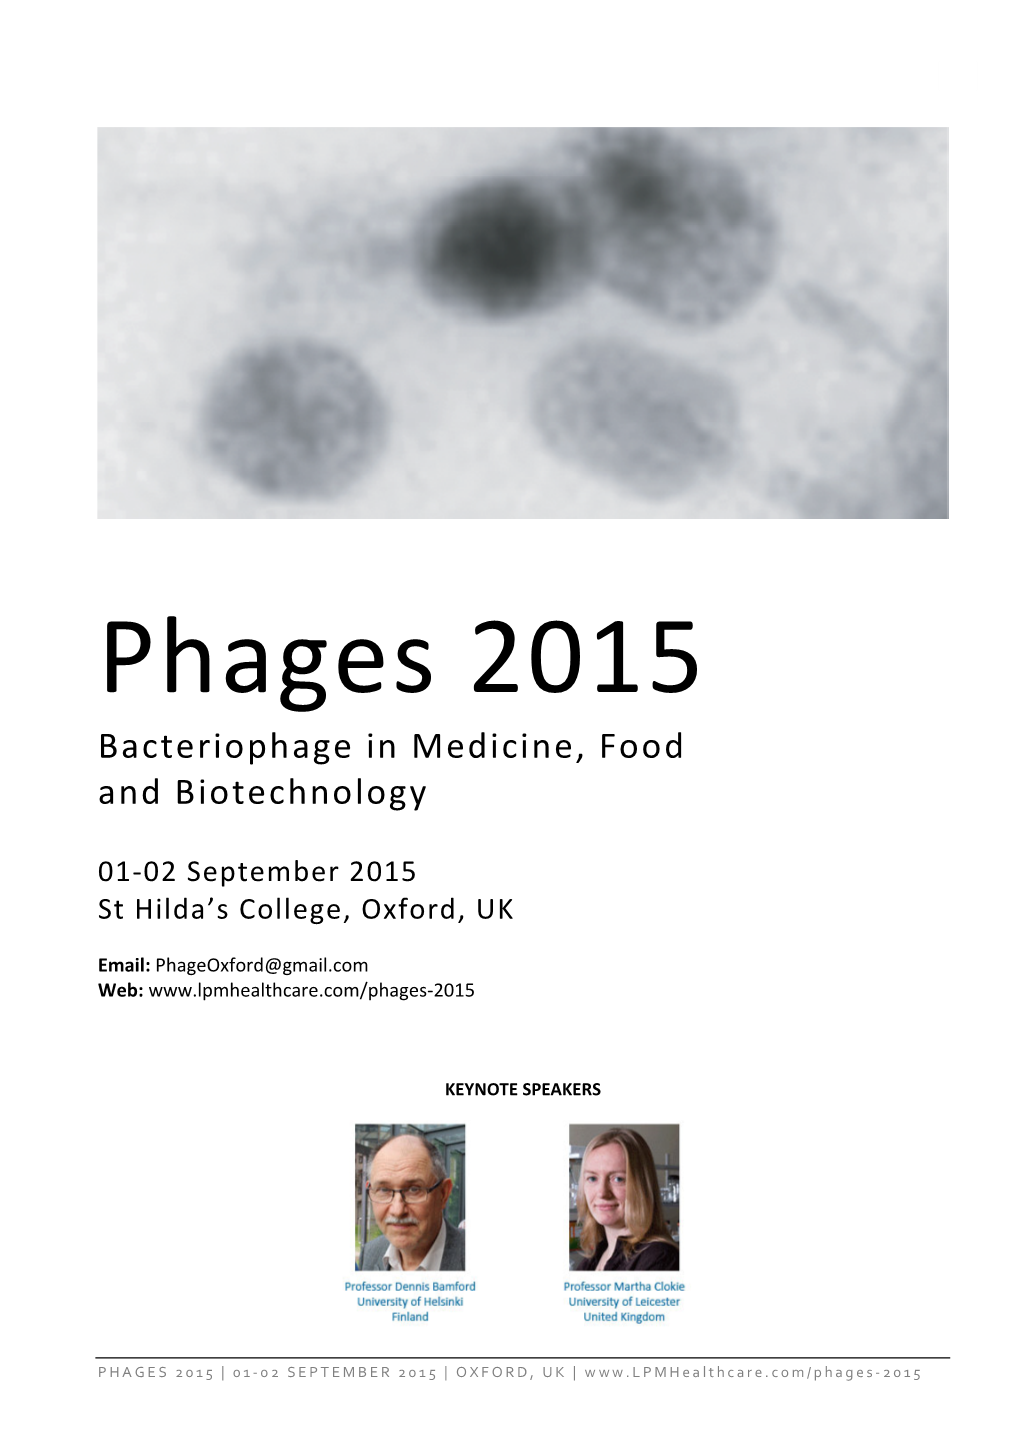 Phages 2015 Bacteriophage in Medicine, Food and Biotechnology